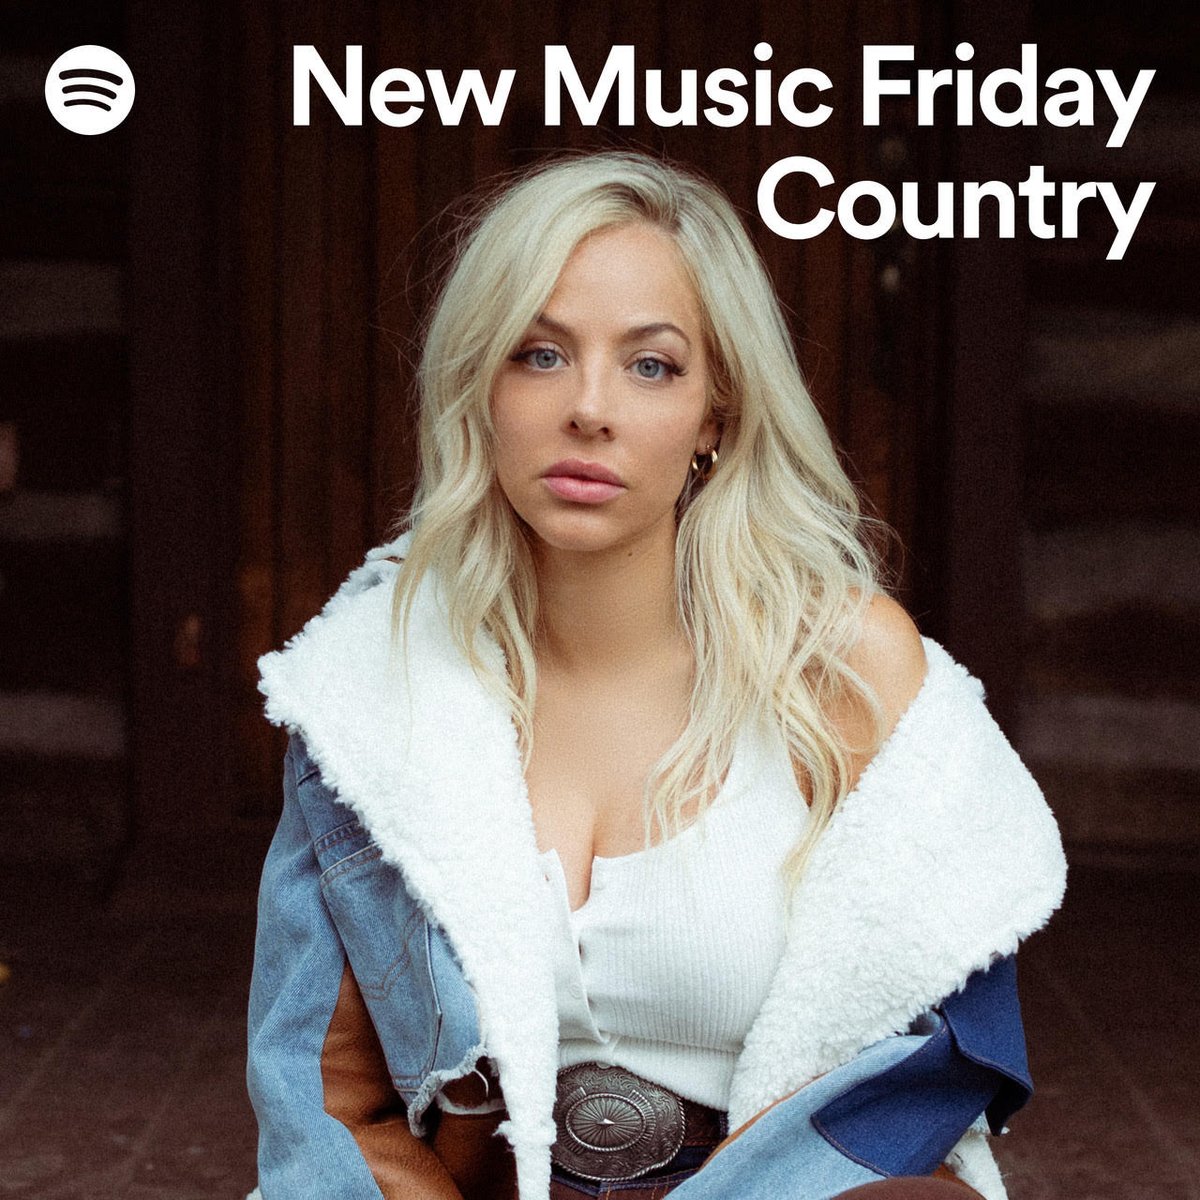 Thank you @Spotify💛 Listen to 'Confession' on New Music Friday Country bit.ly/4b5Nnvu